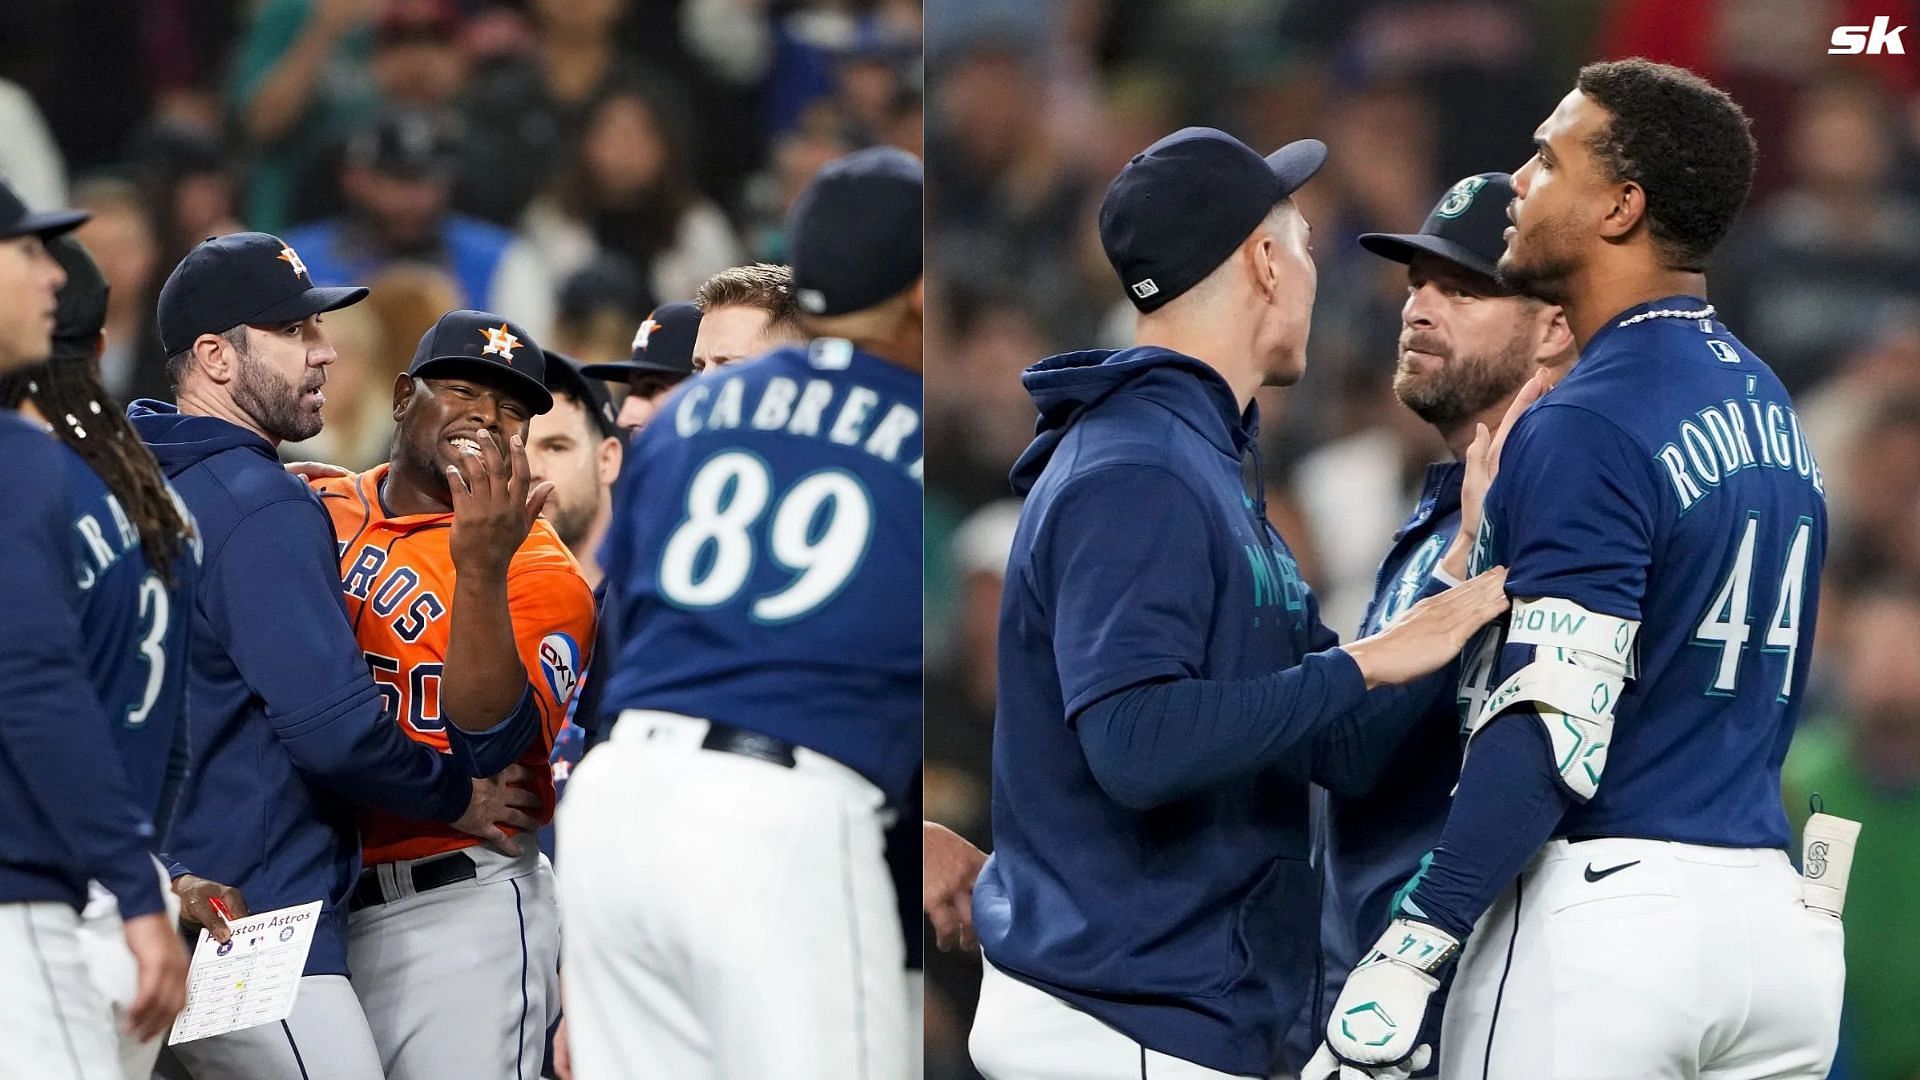 Astros' Martin Maldonado believes the bench-clearing incident was